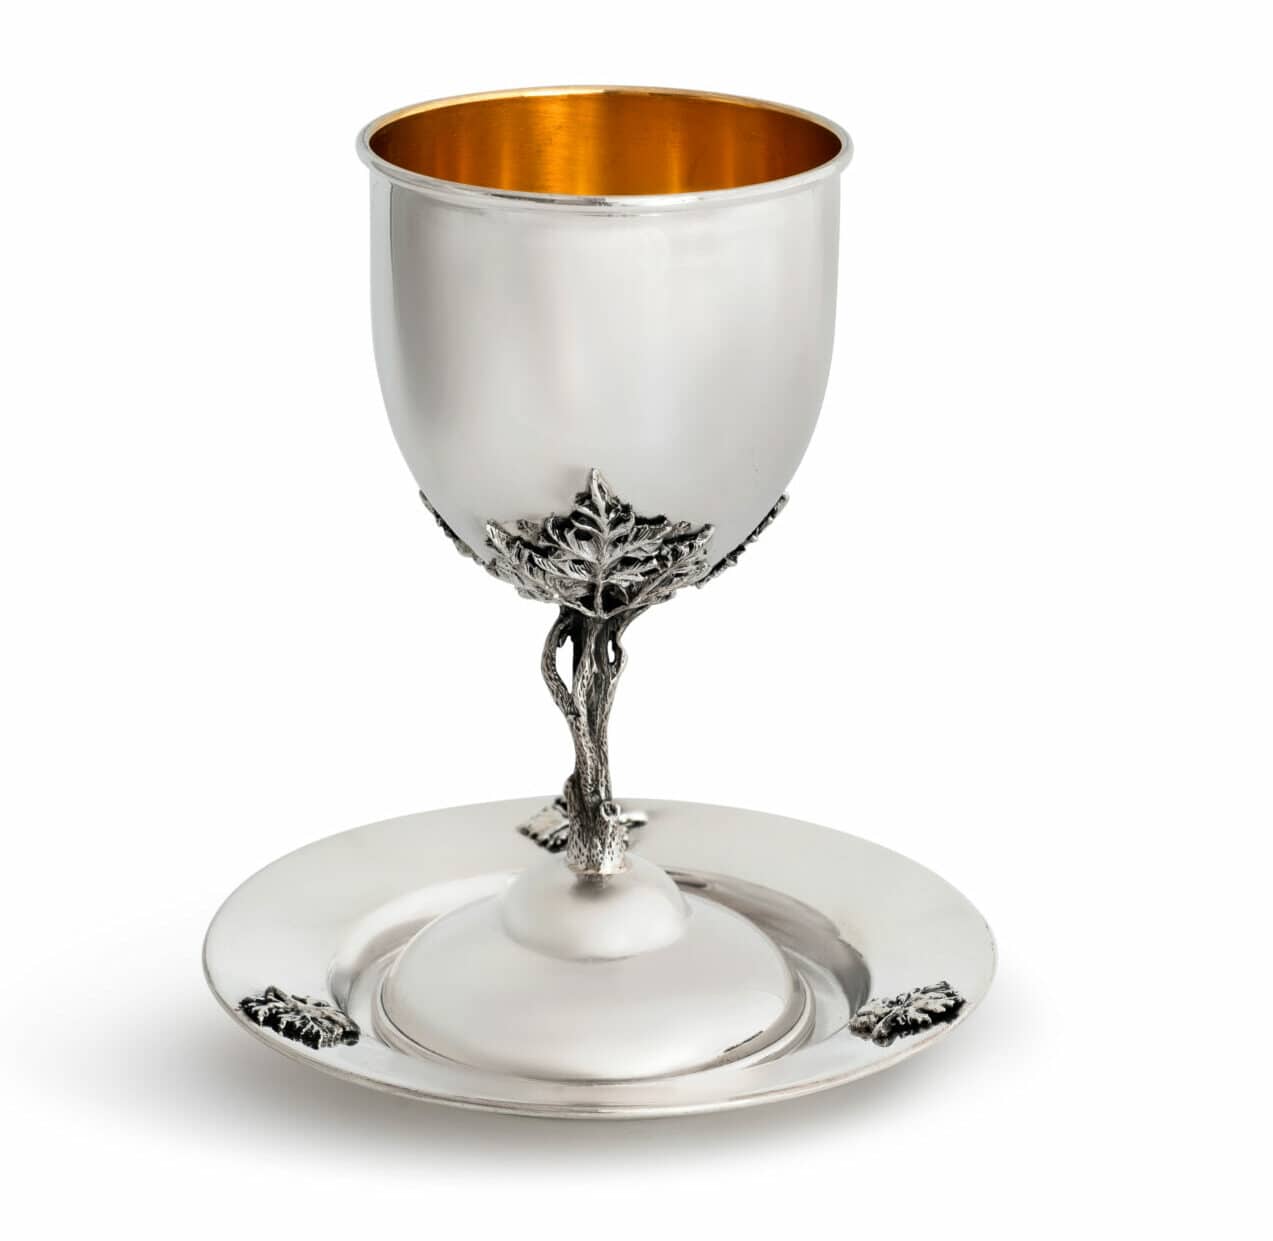 Nature-Inspired Silver Kiddush Cups.